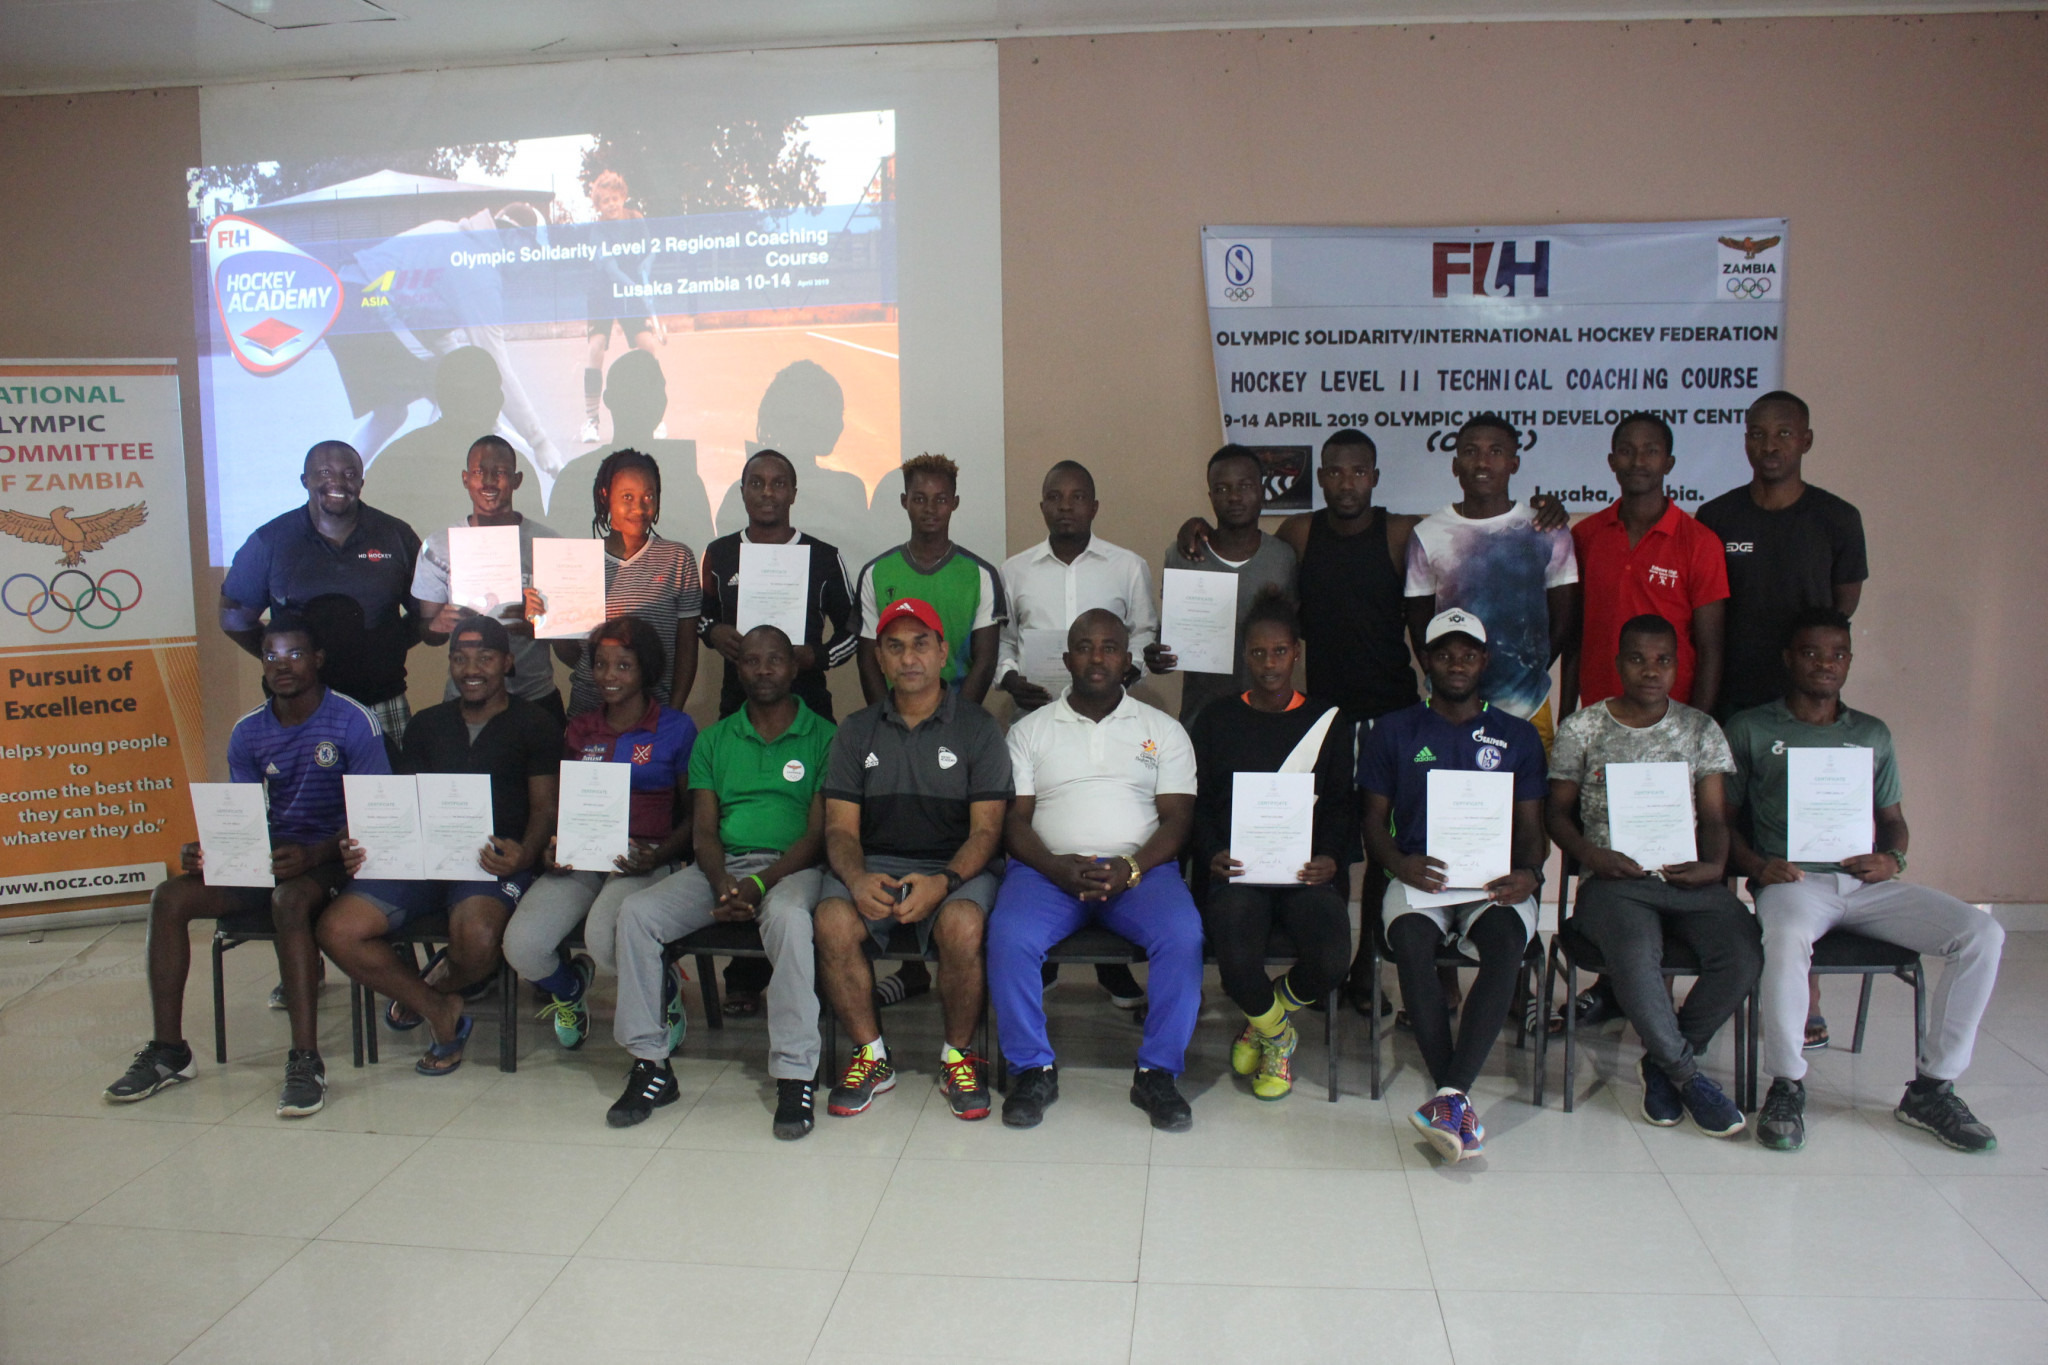 Zambia hosts hockey training coaching course for Southern African nations